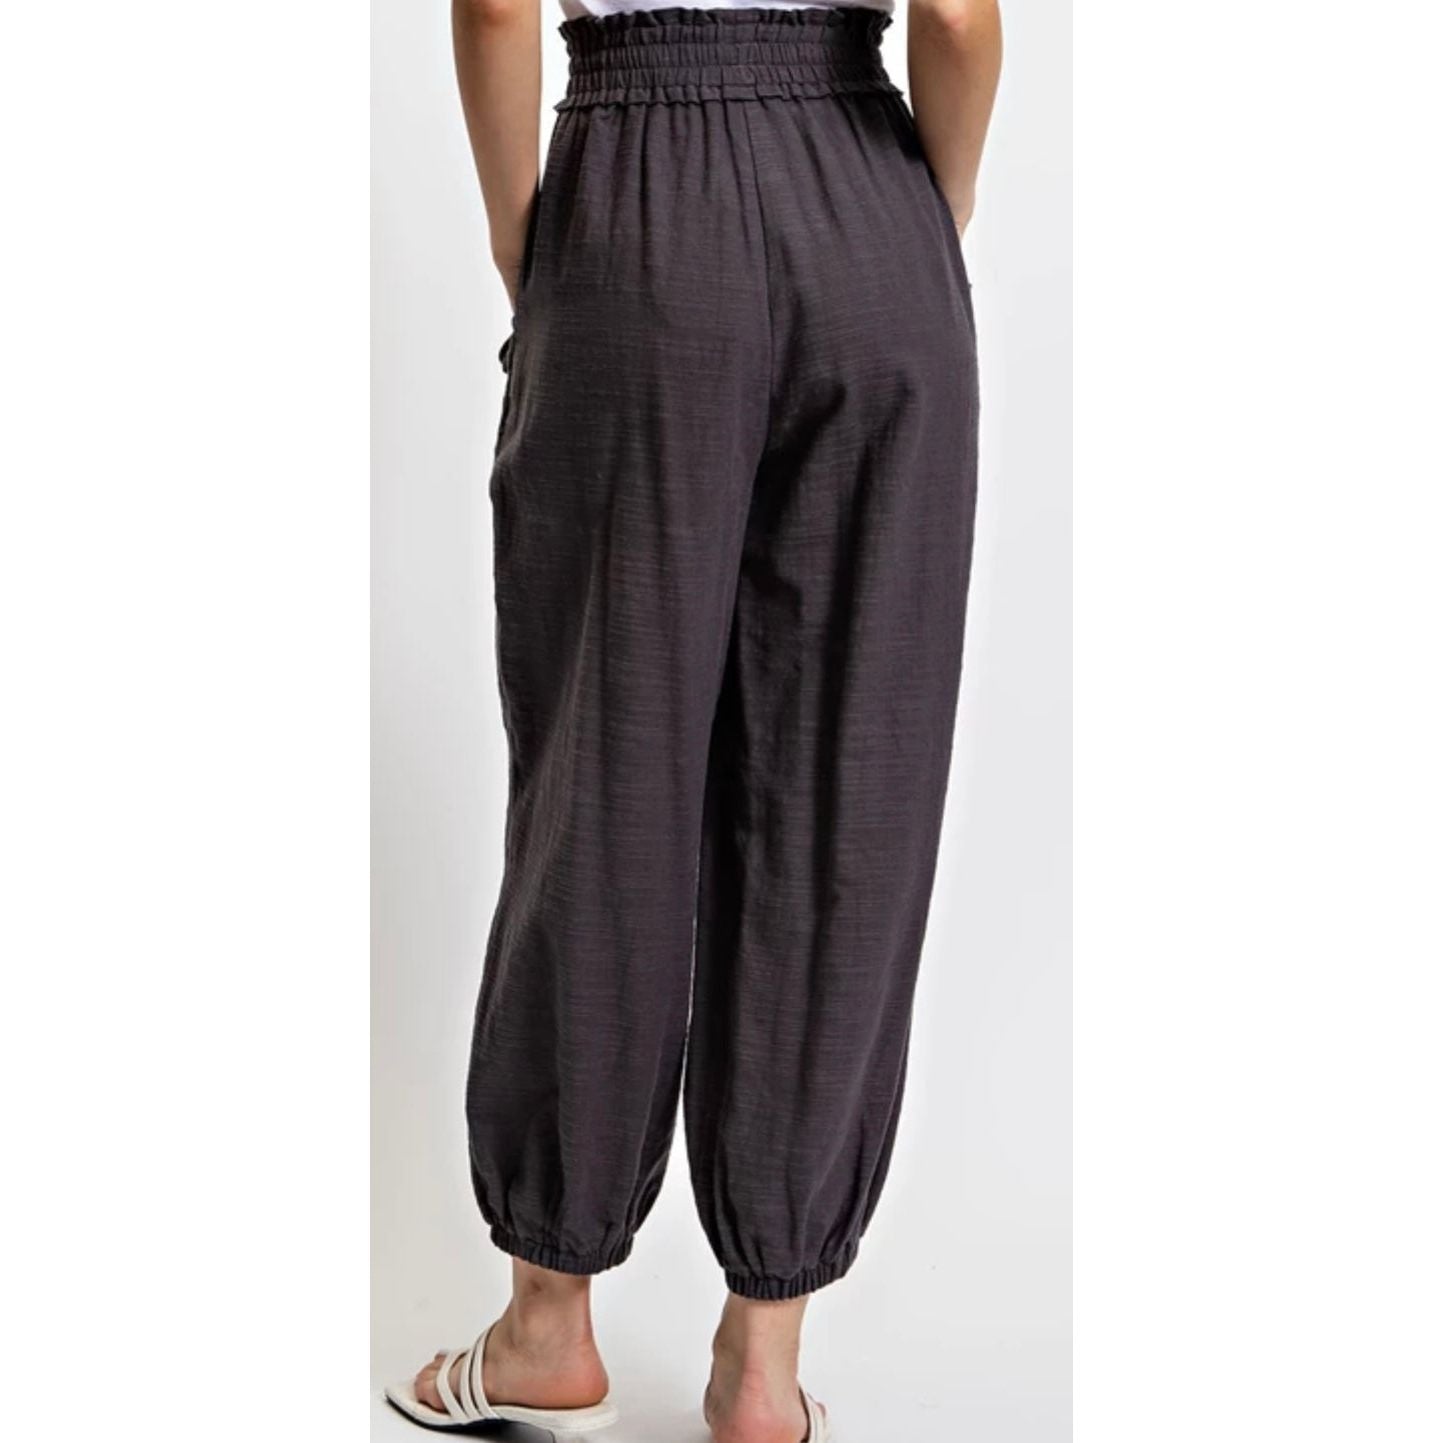 Ramona Cotton Pants With Side Pockets- 2 Colors